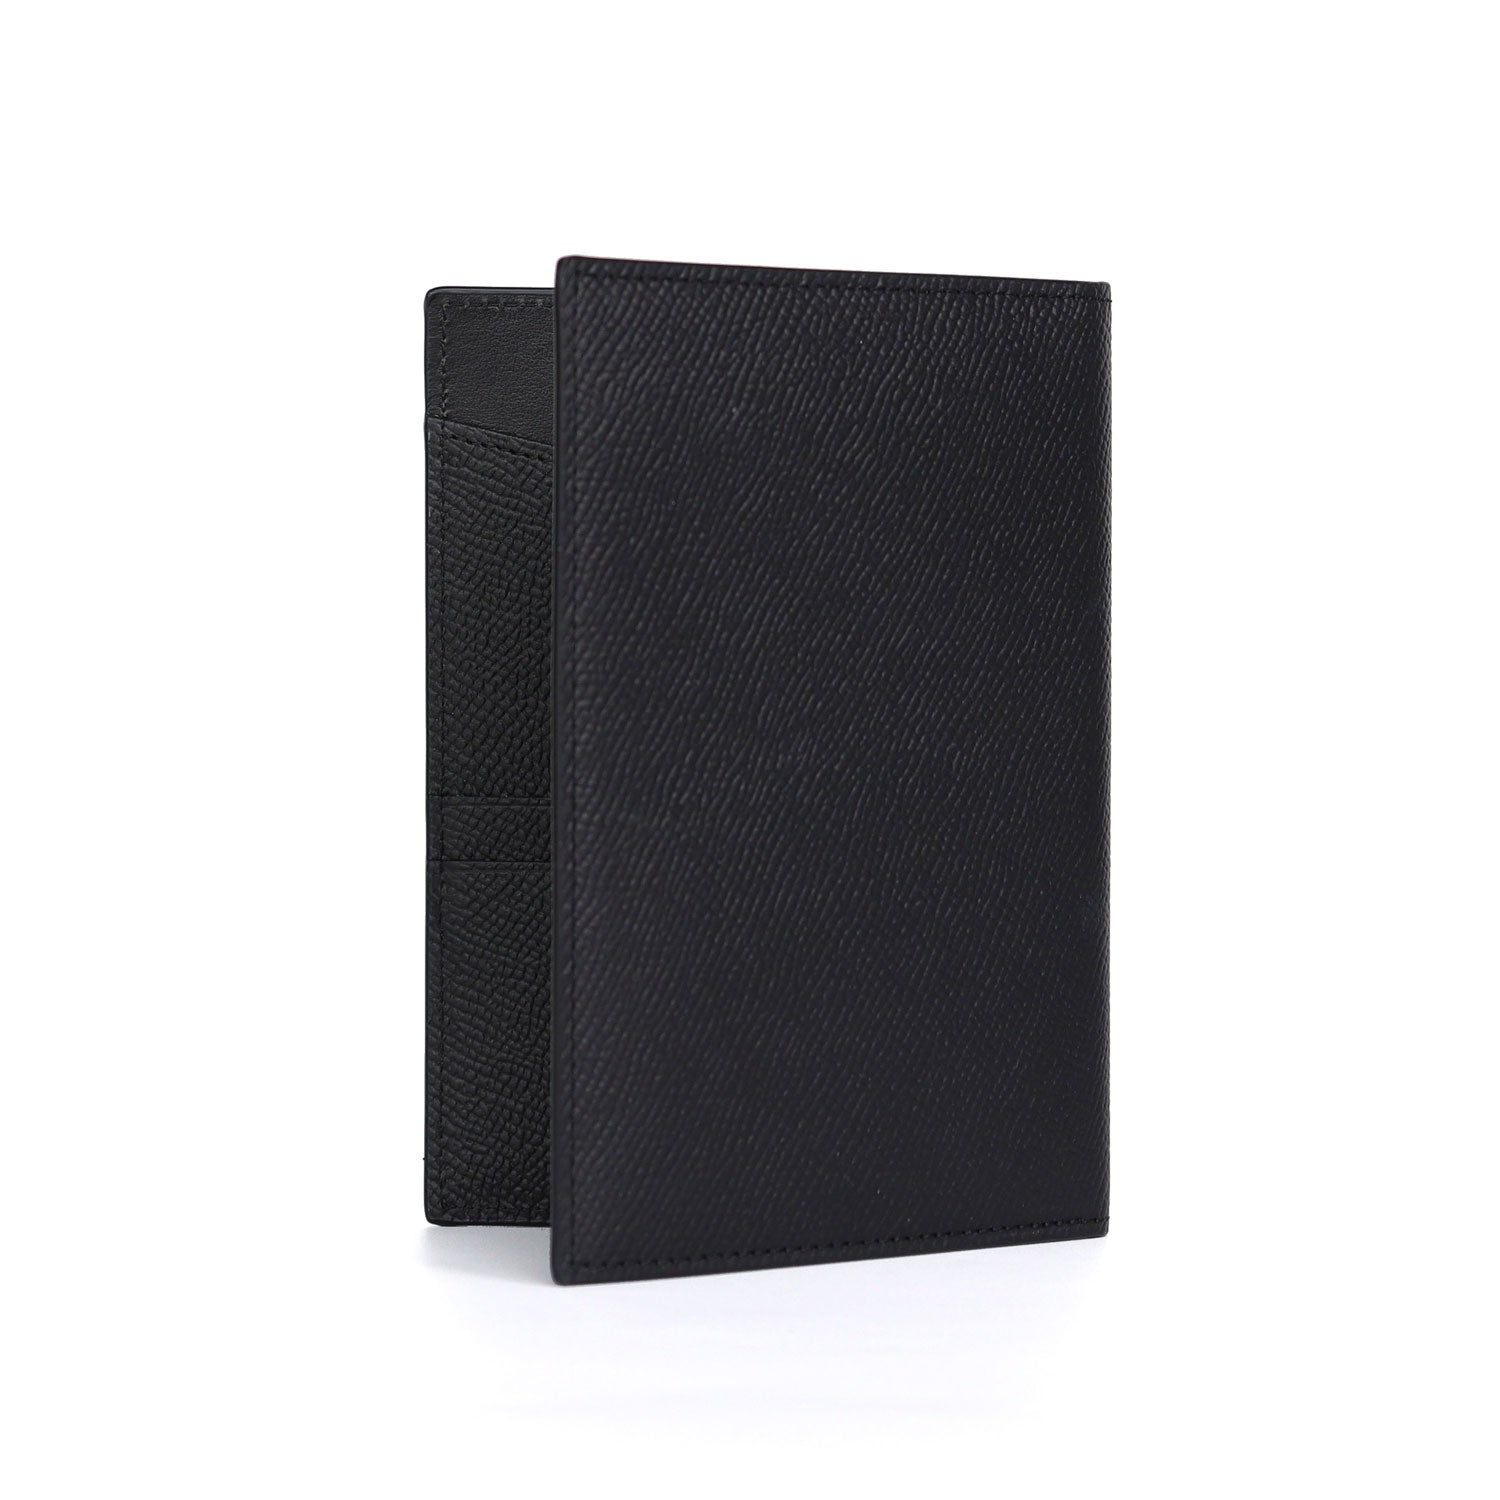 Passport case in Noblesse leather